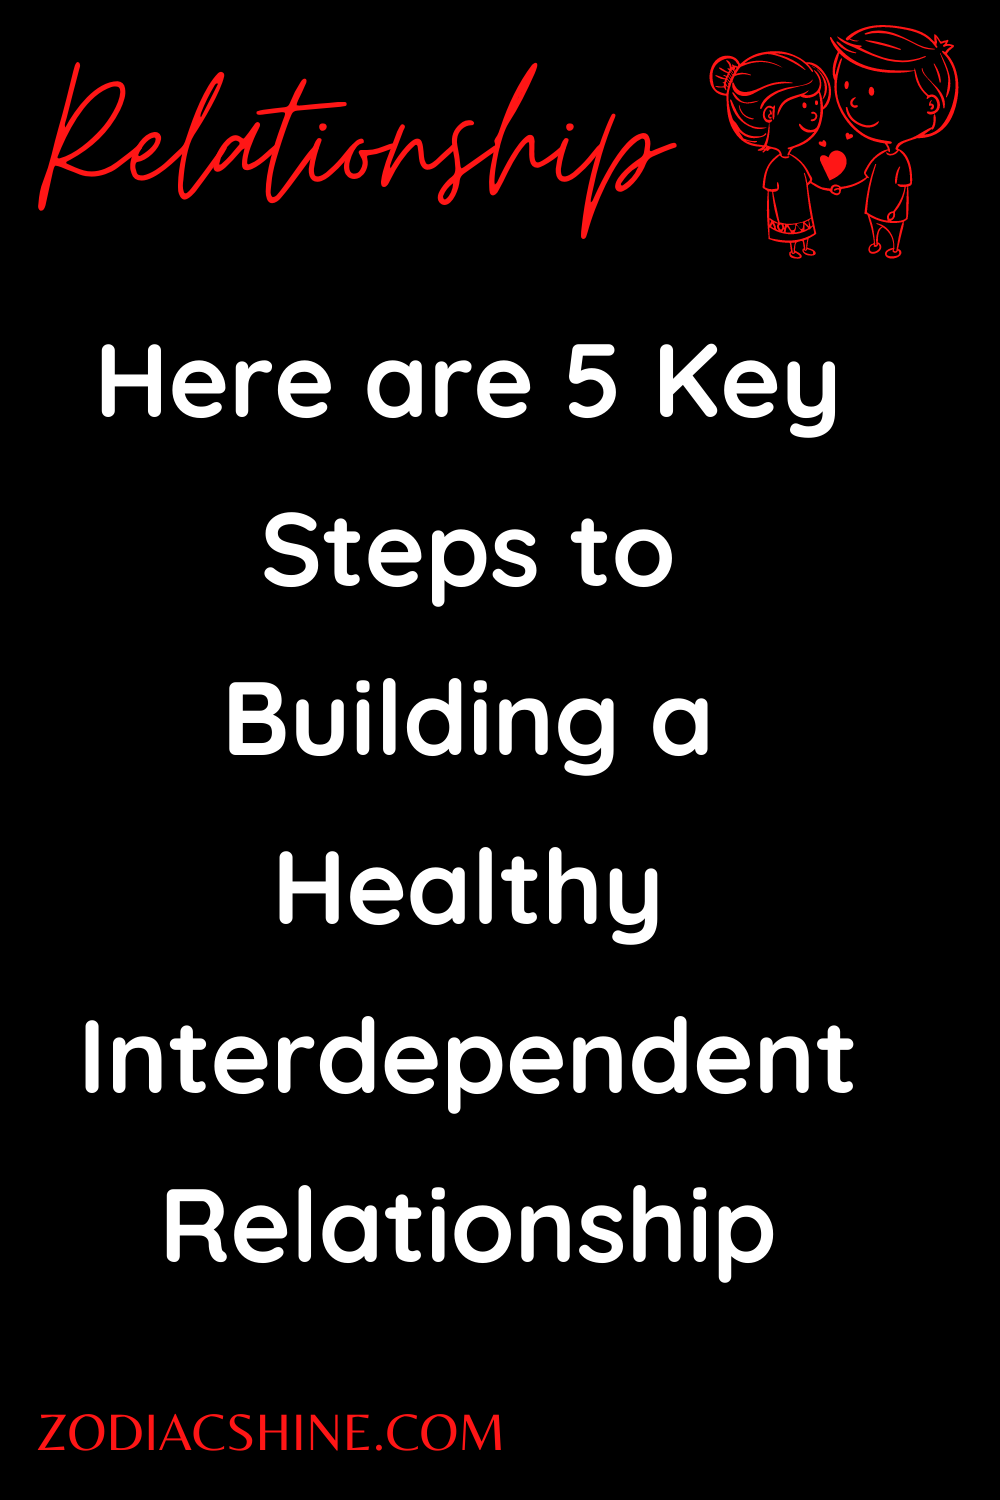 Here are 5 Key Steps to Building a Healthy Interdependent Relationship